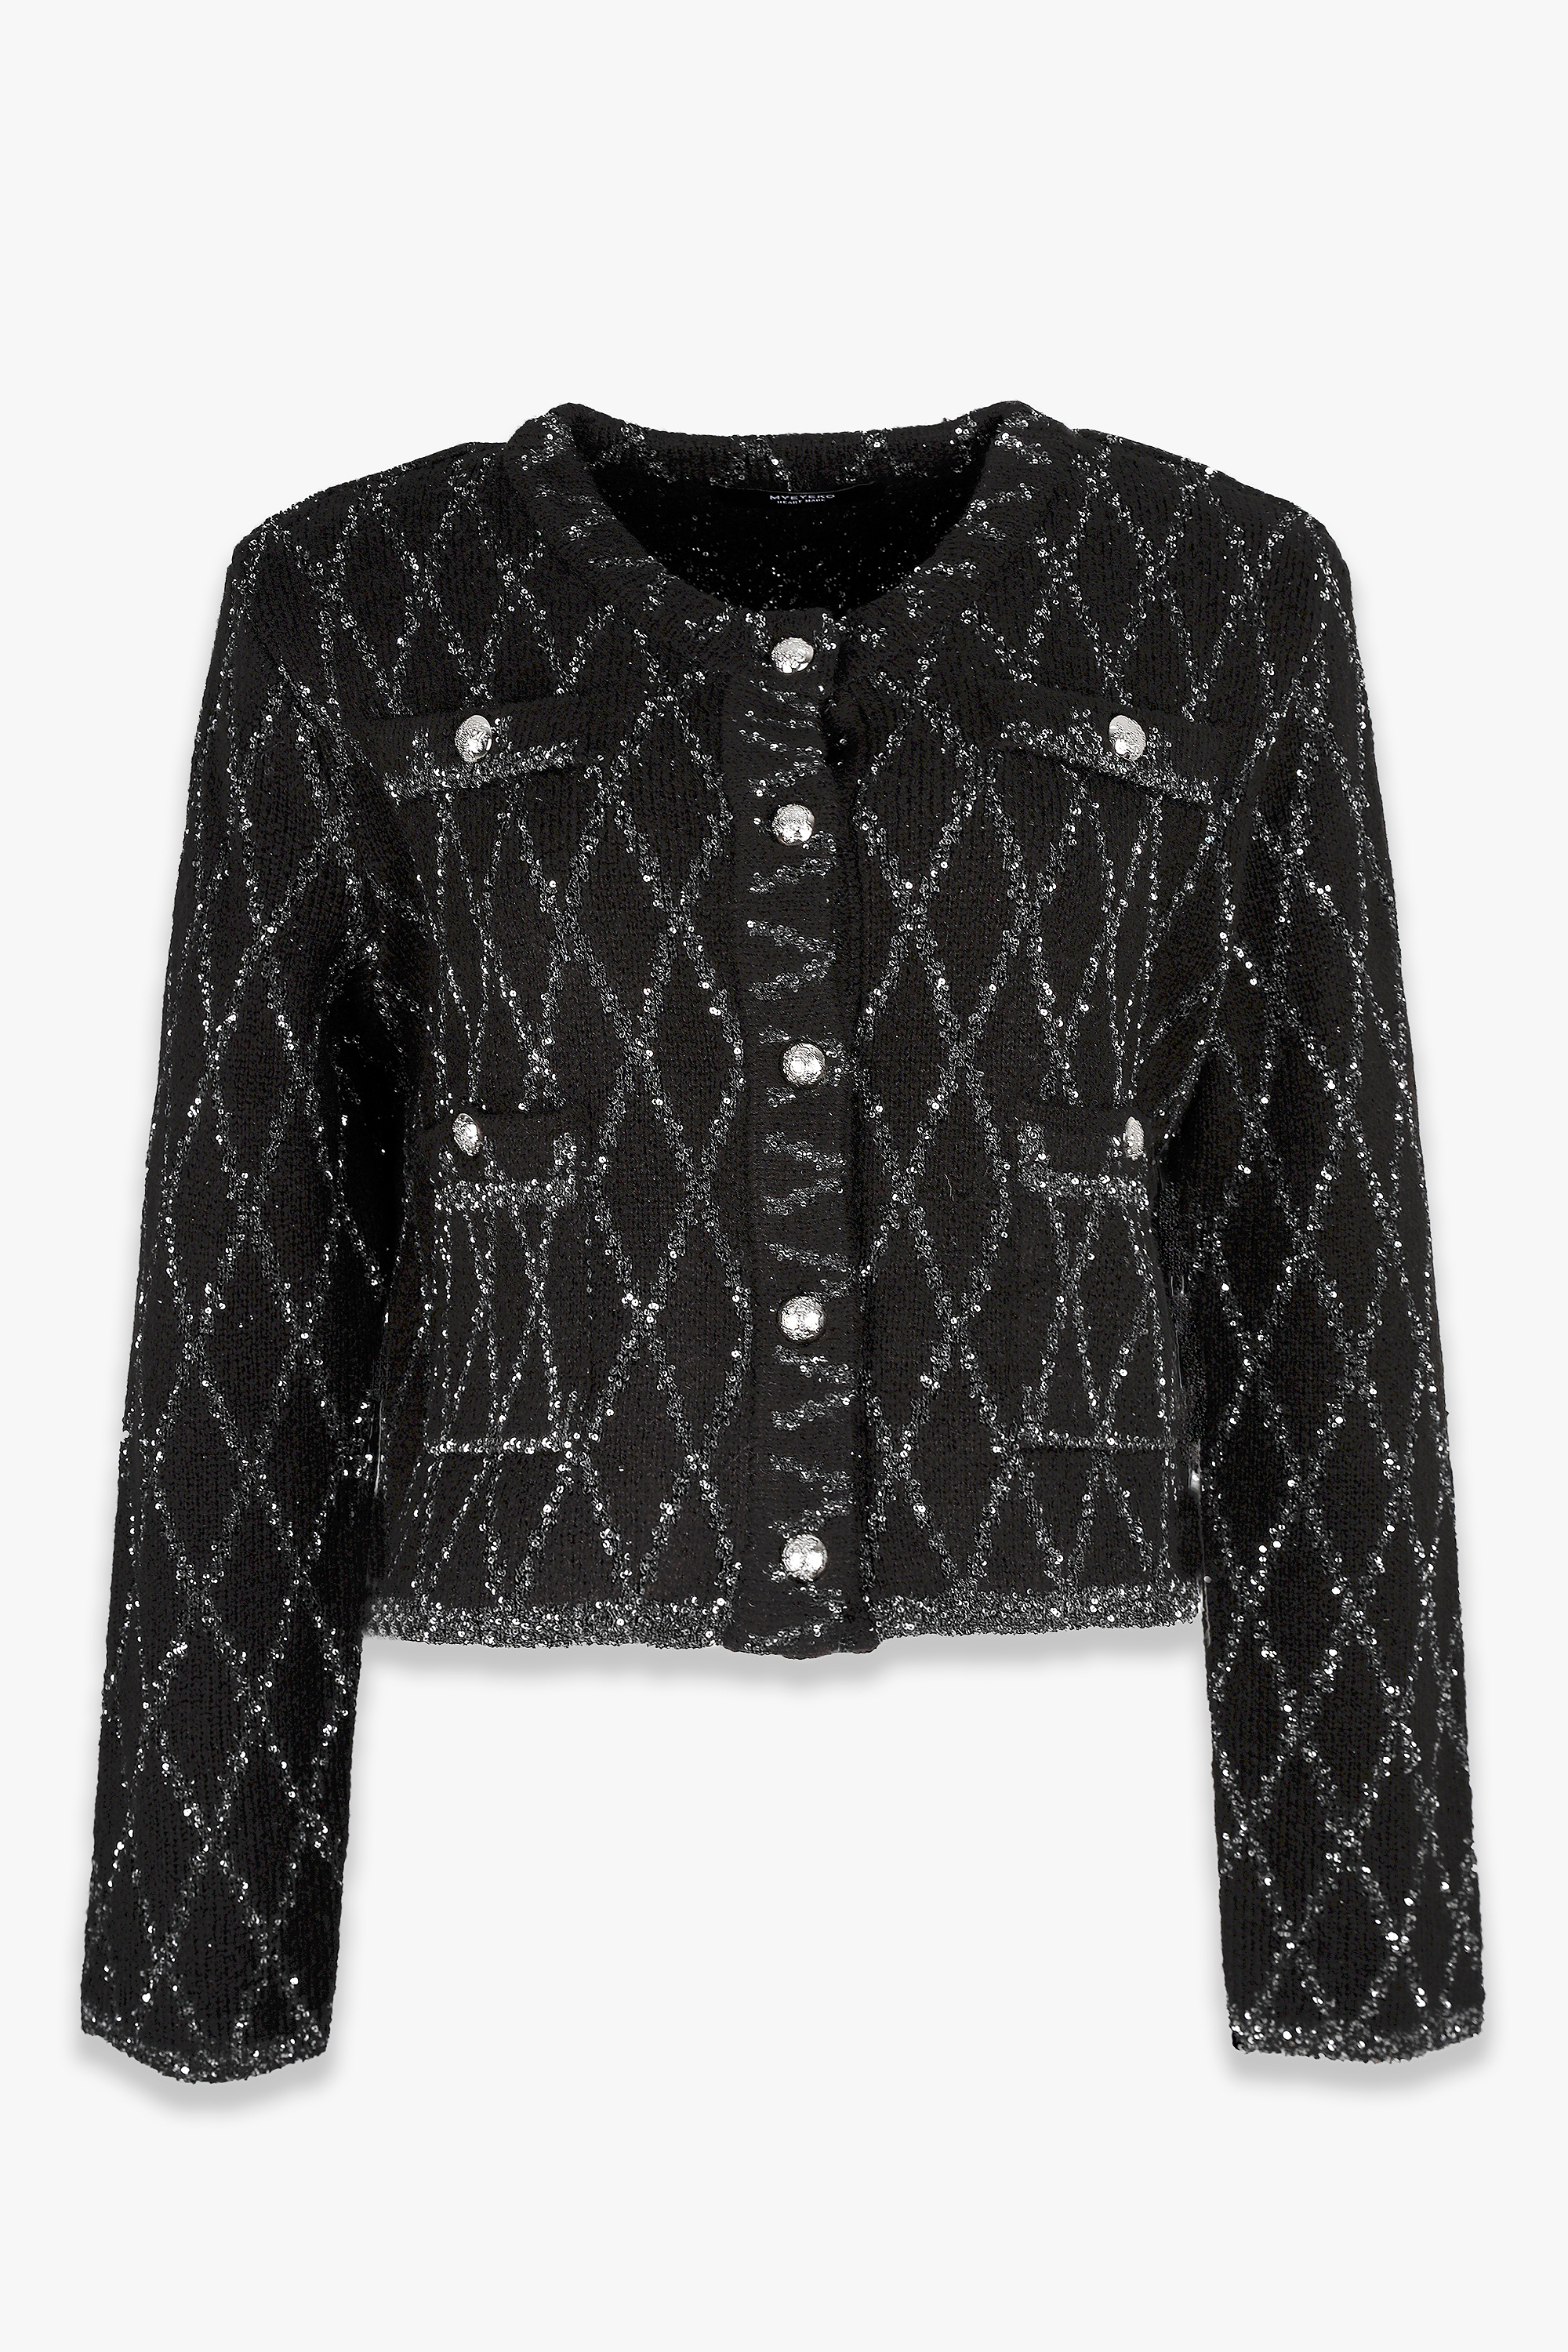 HIGH QUALITY LINE - MYEYEKO 23 SPRING COLLECTION / SEQUIN DIA KNIT JACKET (BLACK) Reorder 